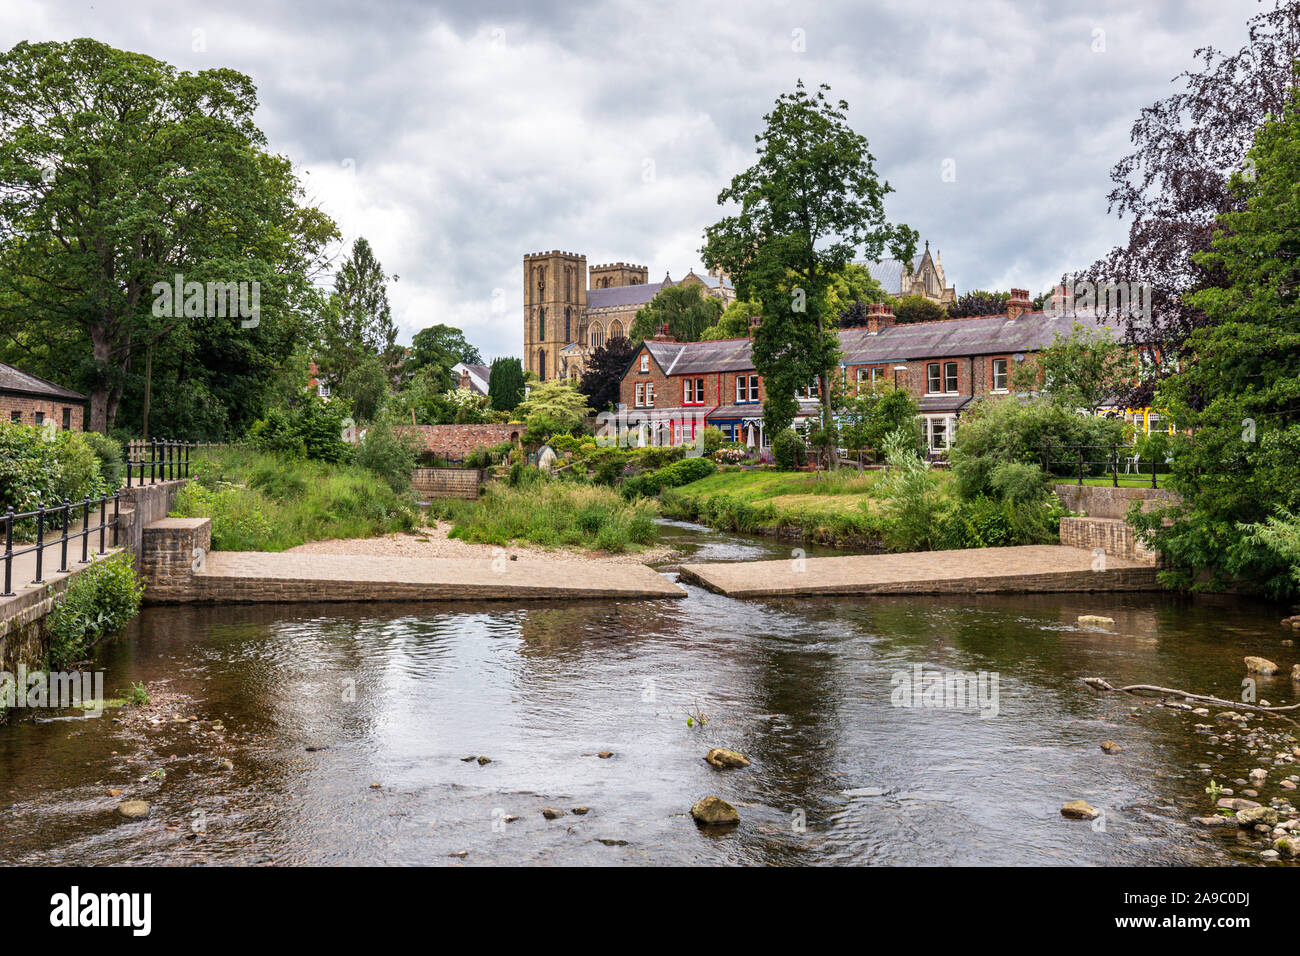 Alma weir on the River Skell, Ripon, a cathedral city in the Borough of Harrogate, North Yorkshire, England. Stock Photo